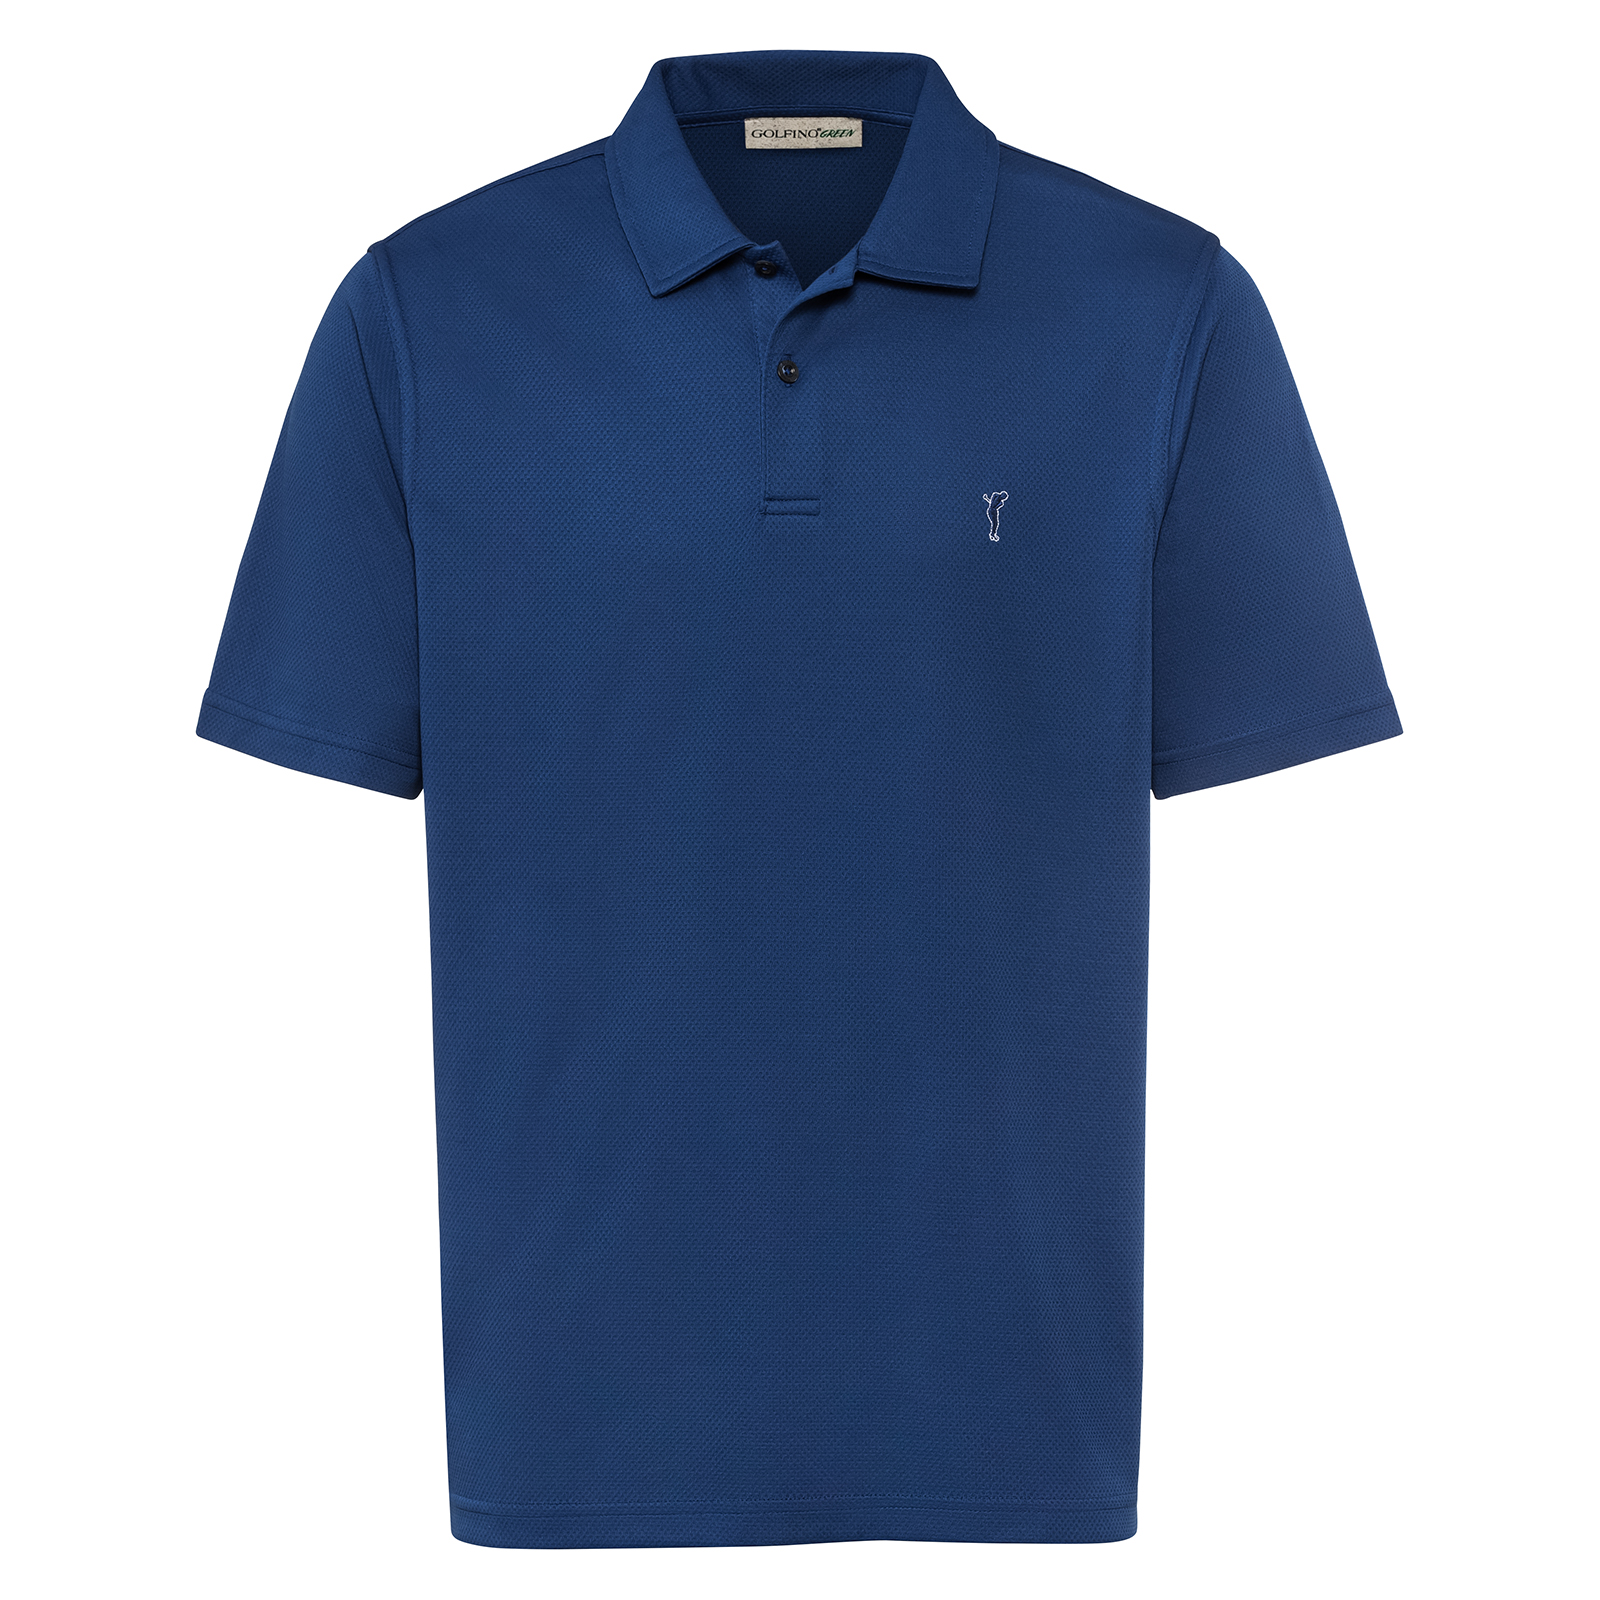 Men's golf shirt containing sustainable Kafetex® functional fibre 